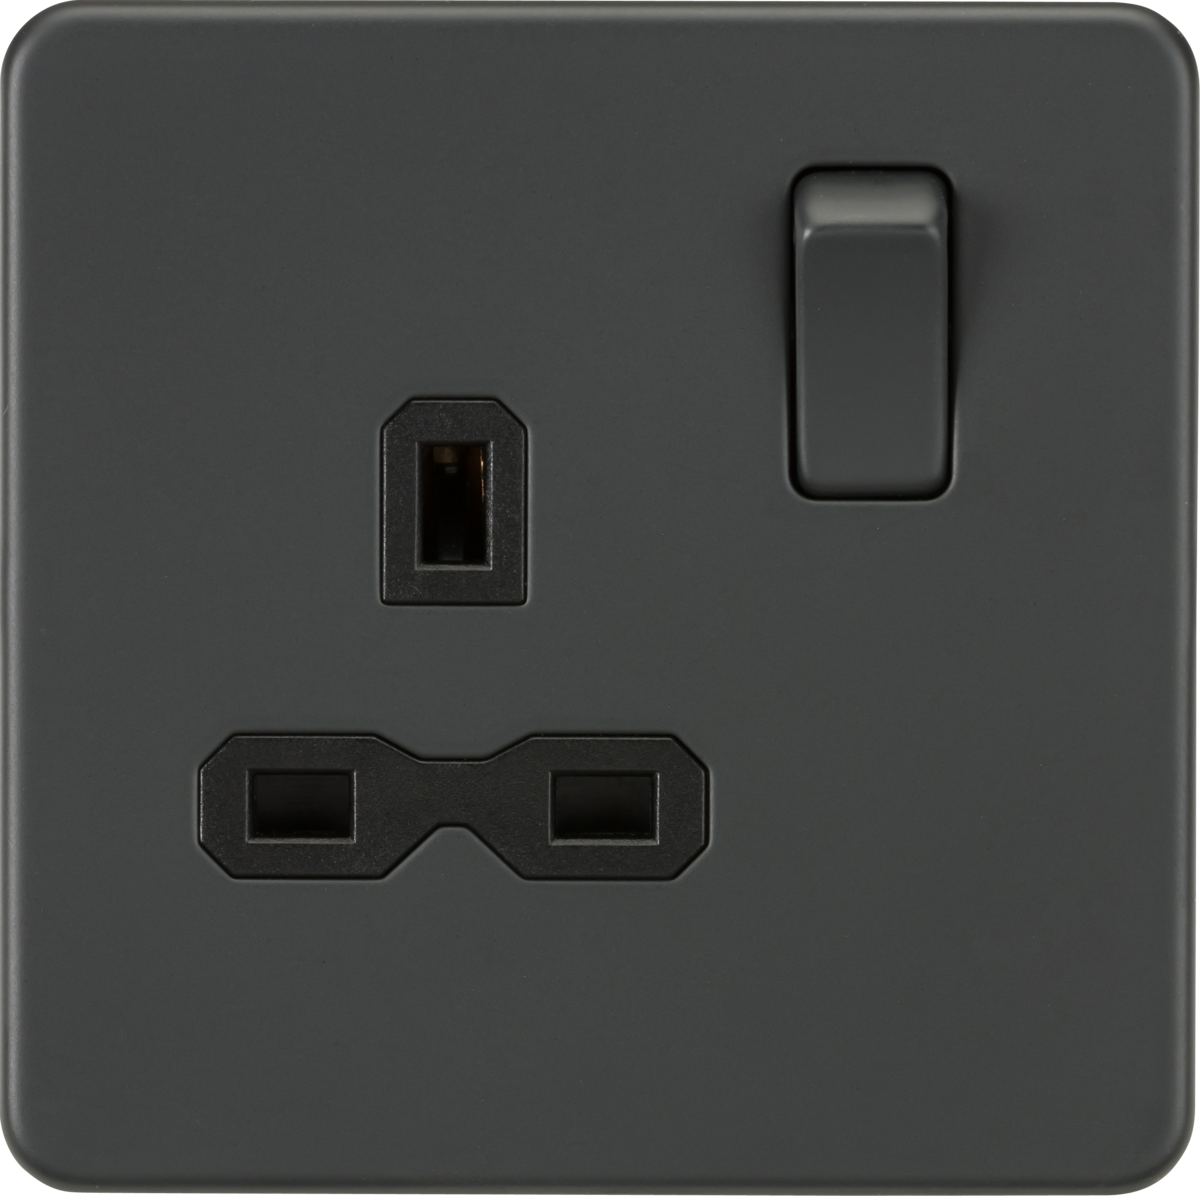 Screwless 13A 1G DP switched socket - Anthracite